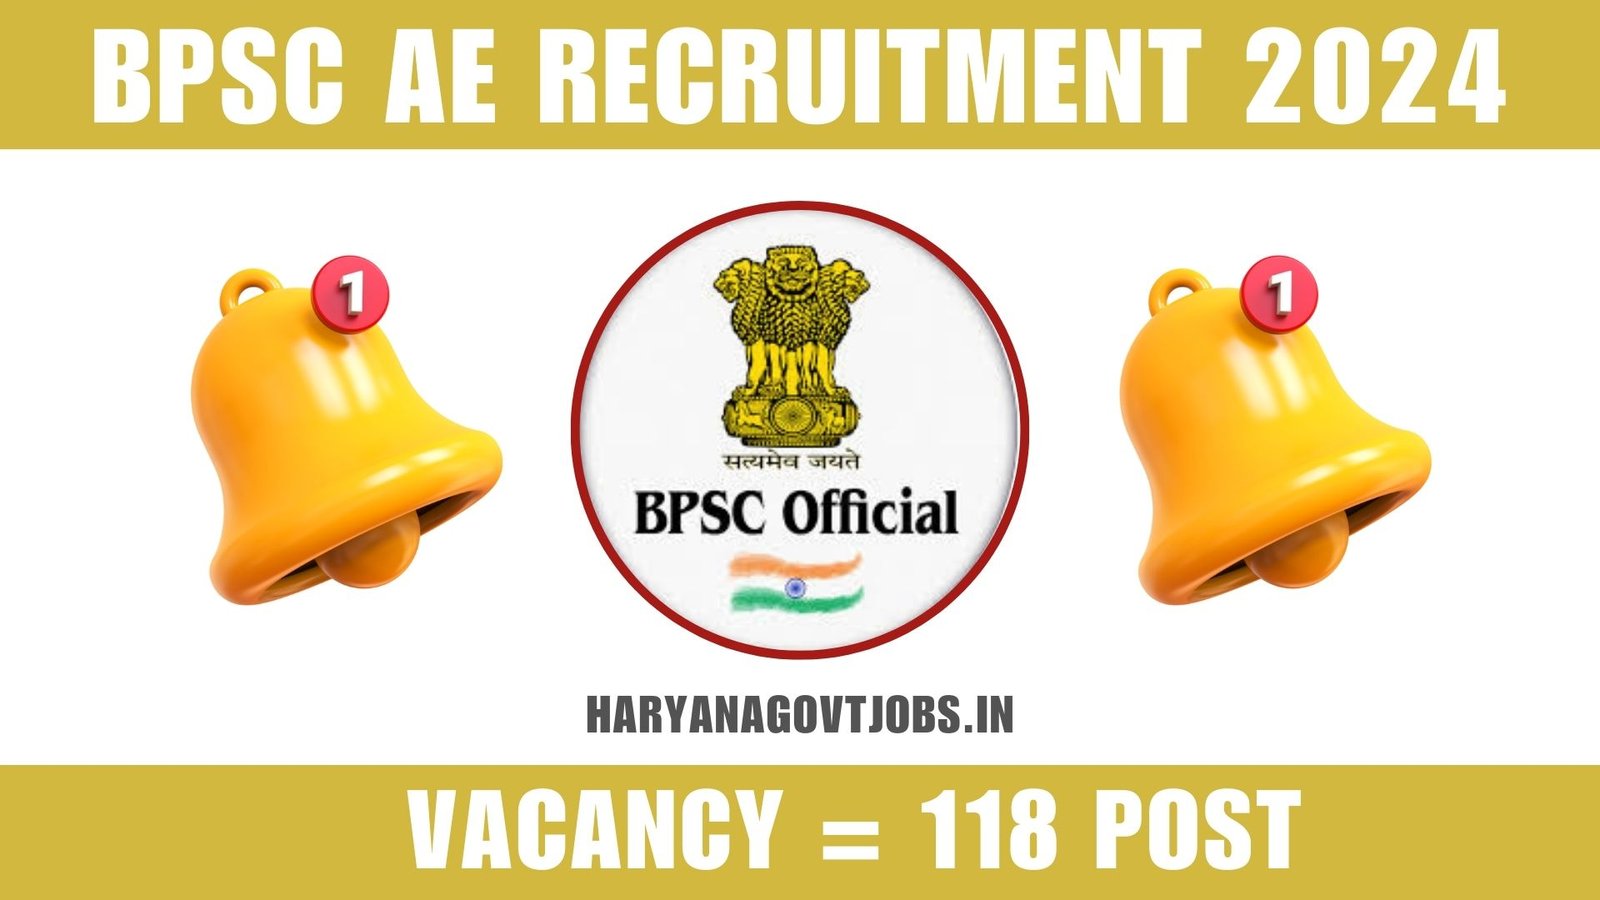 BPSC AE Recruitment 2024 Overview